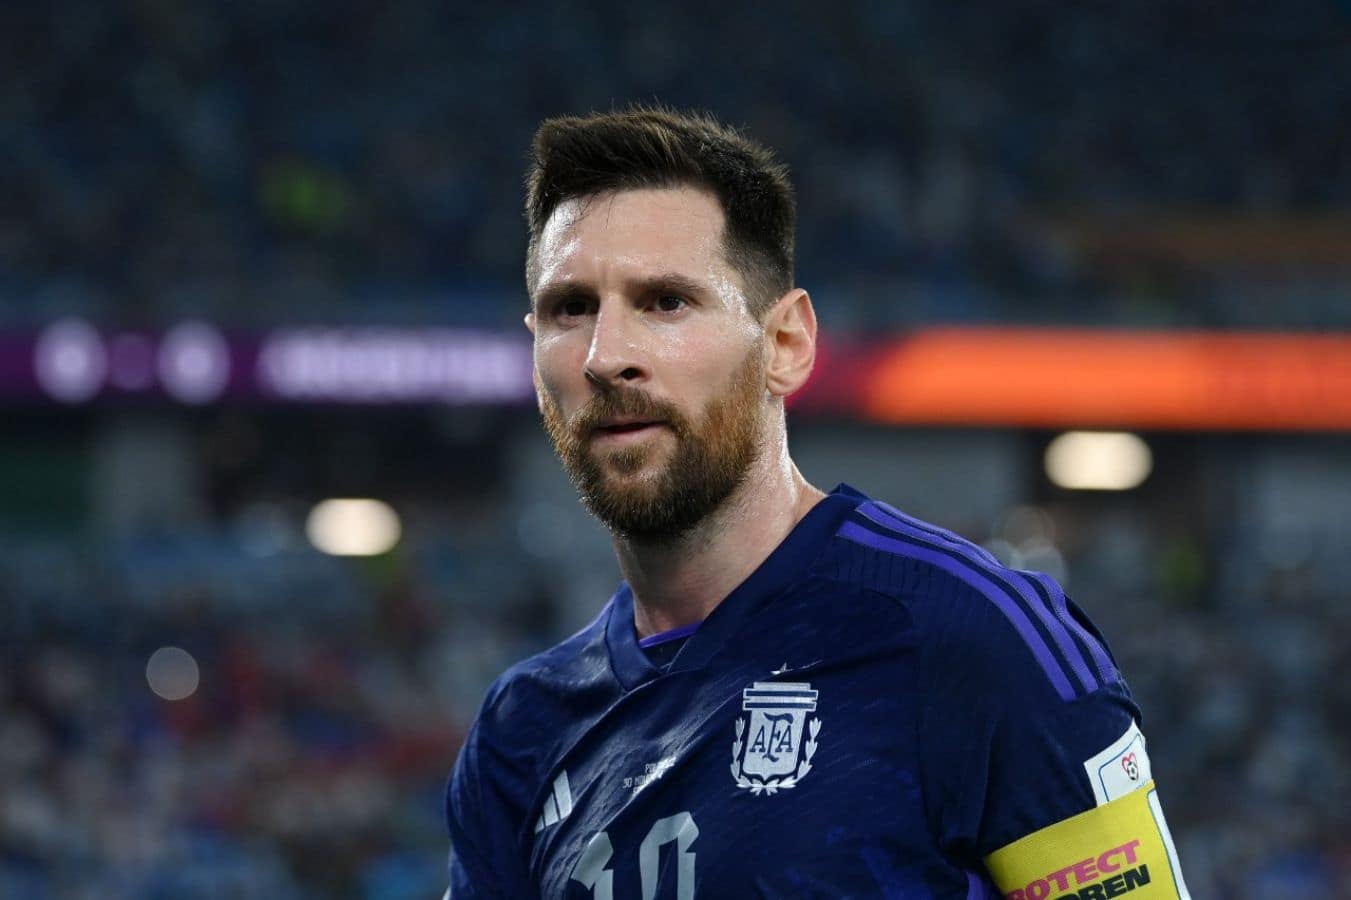 Lionel Messi Reacts After Surpassing Diego Maradona During Argentina Vs Poland Tie